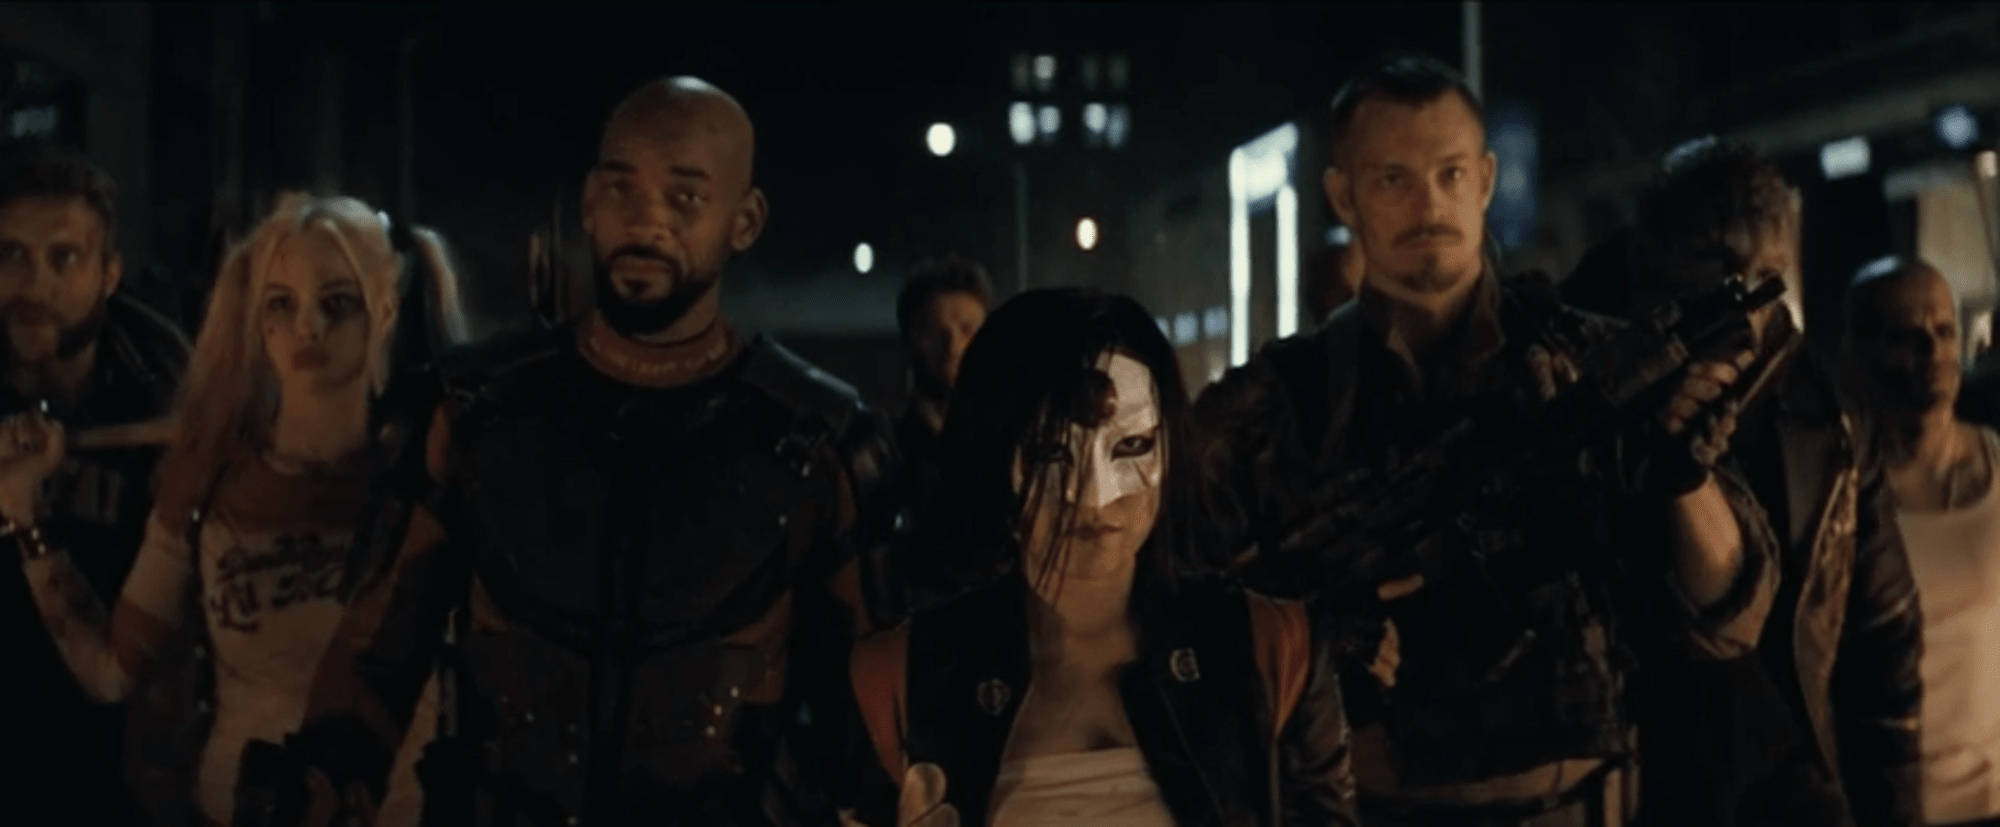 Suicide Squad 2 Could Aim For R Rating